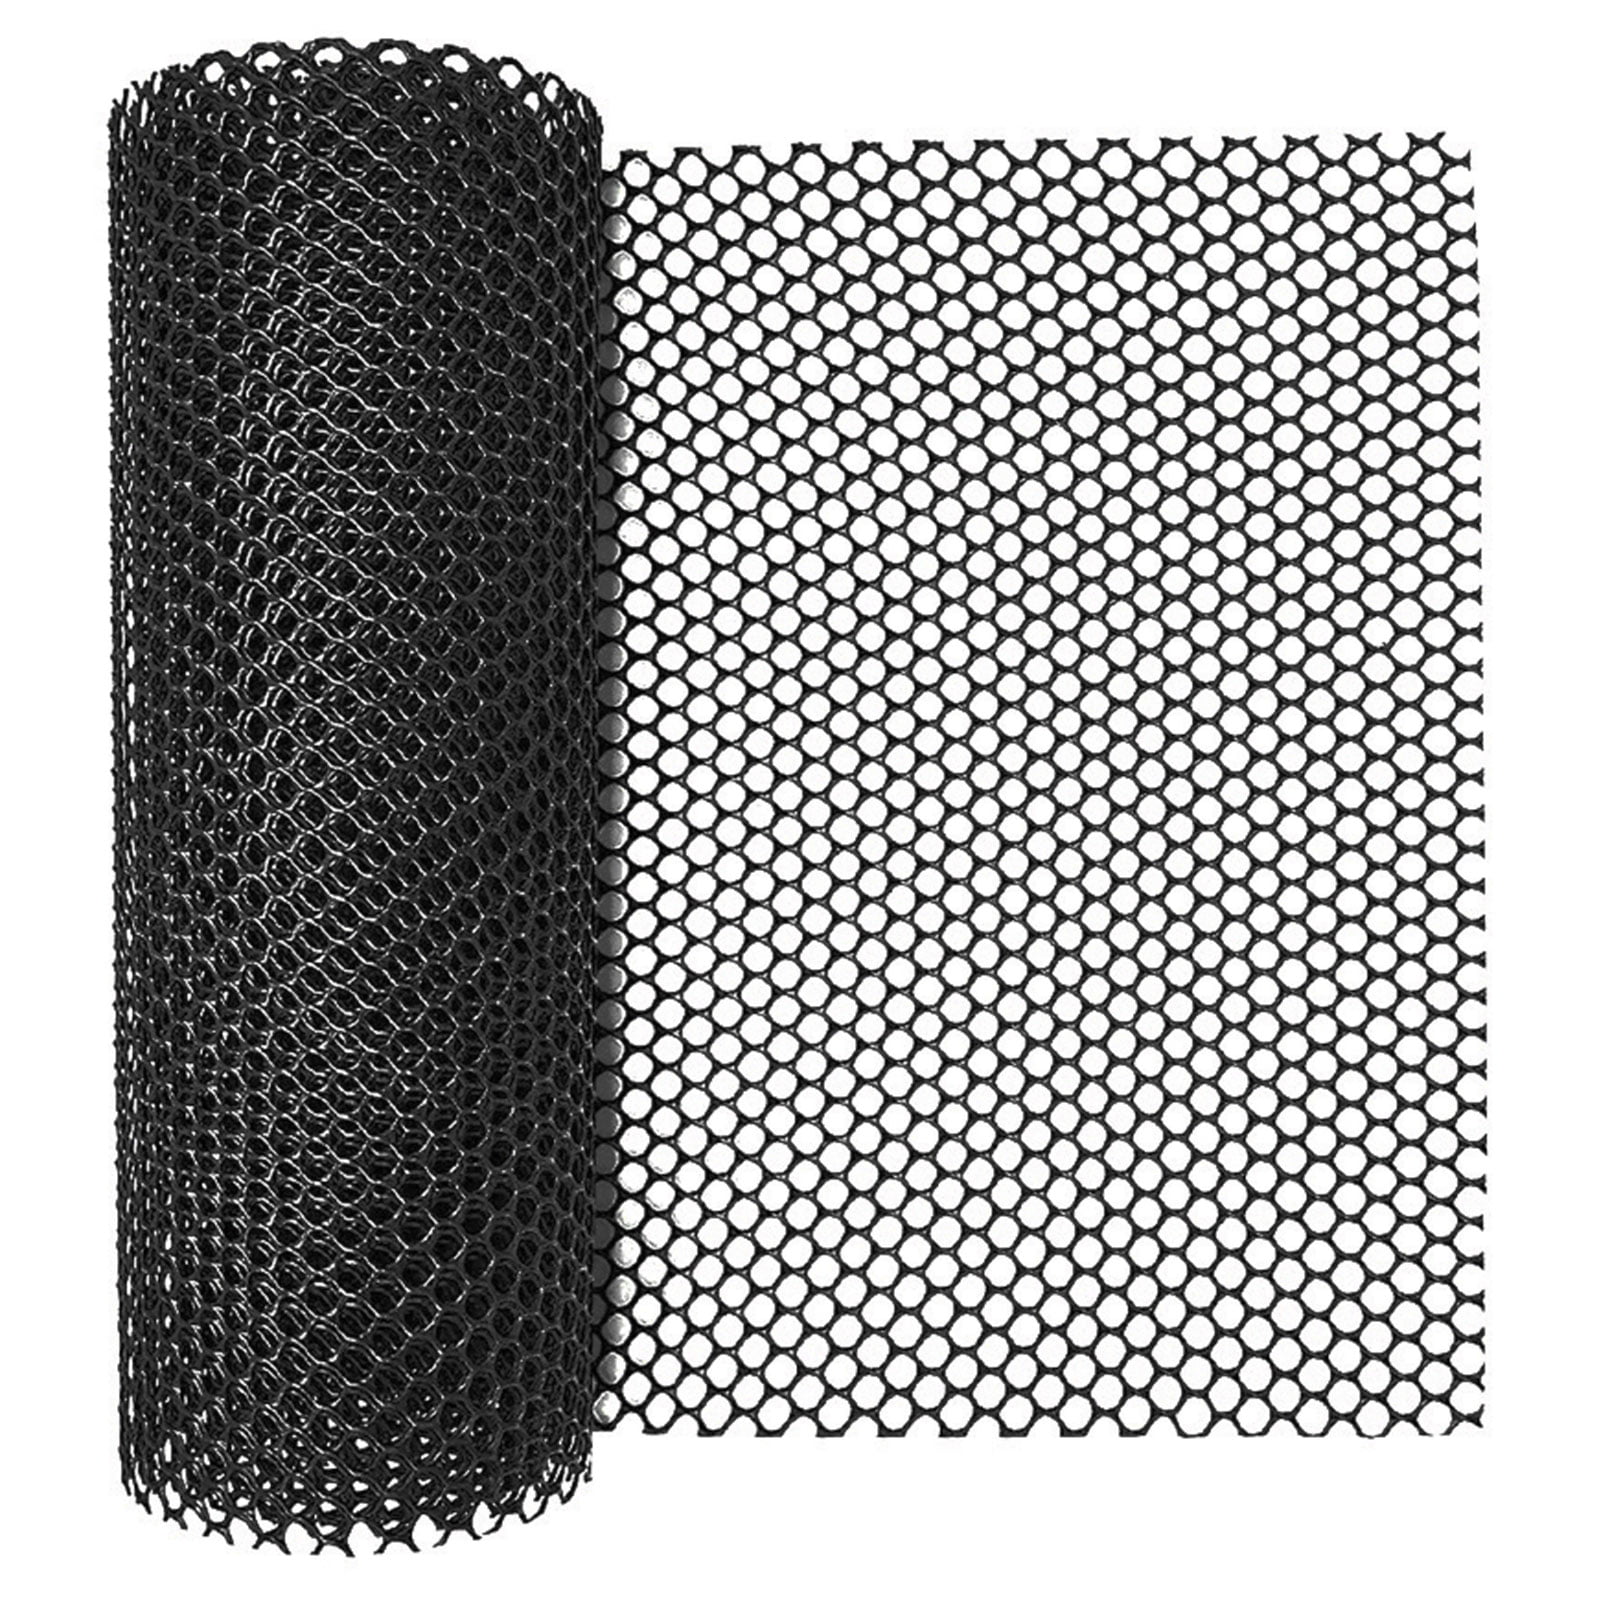 Washranp Plastic Poultry Chicken Wire Fencing,500gsm Hexagonal Hole DIY Fencing  Mesh for Poultry Fencing Arboretum 